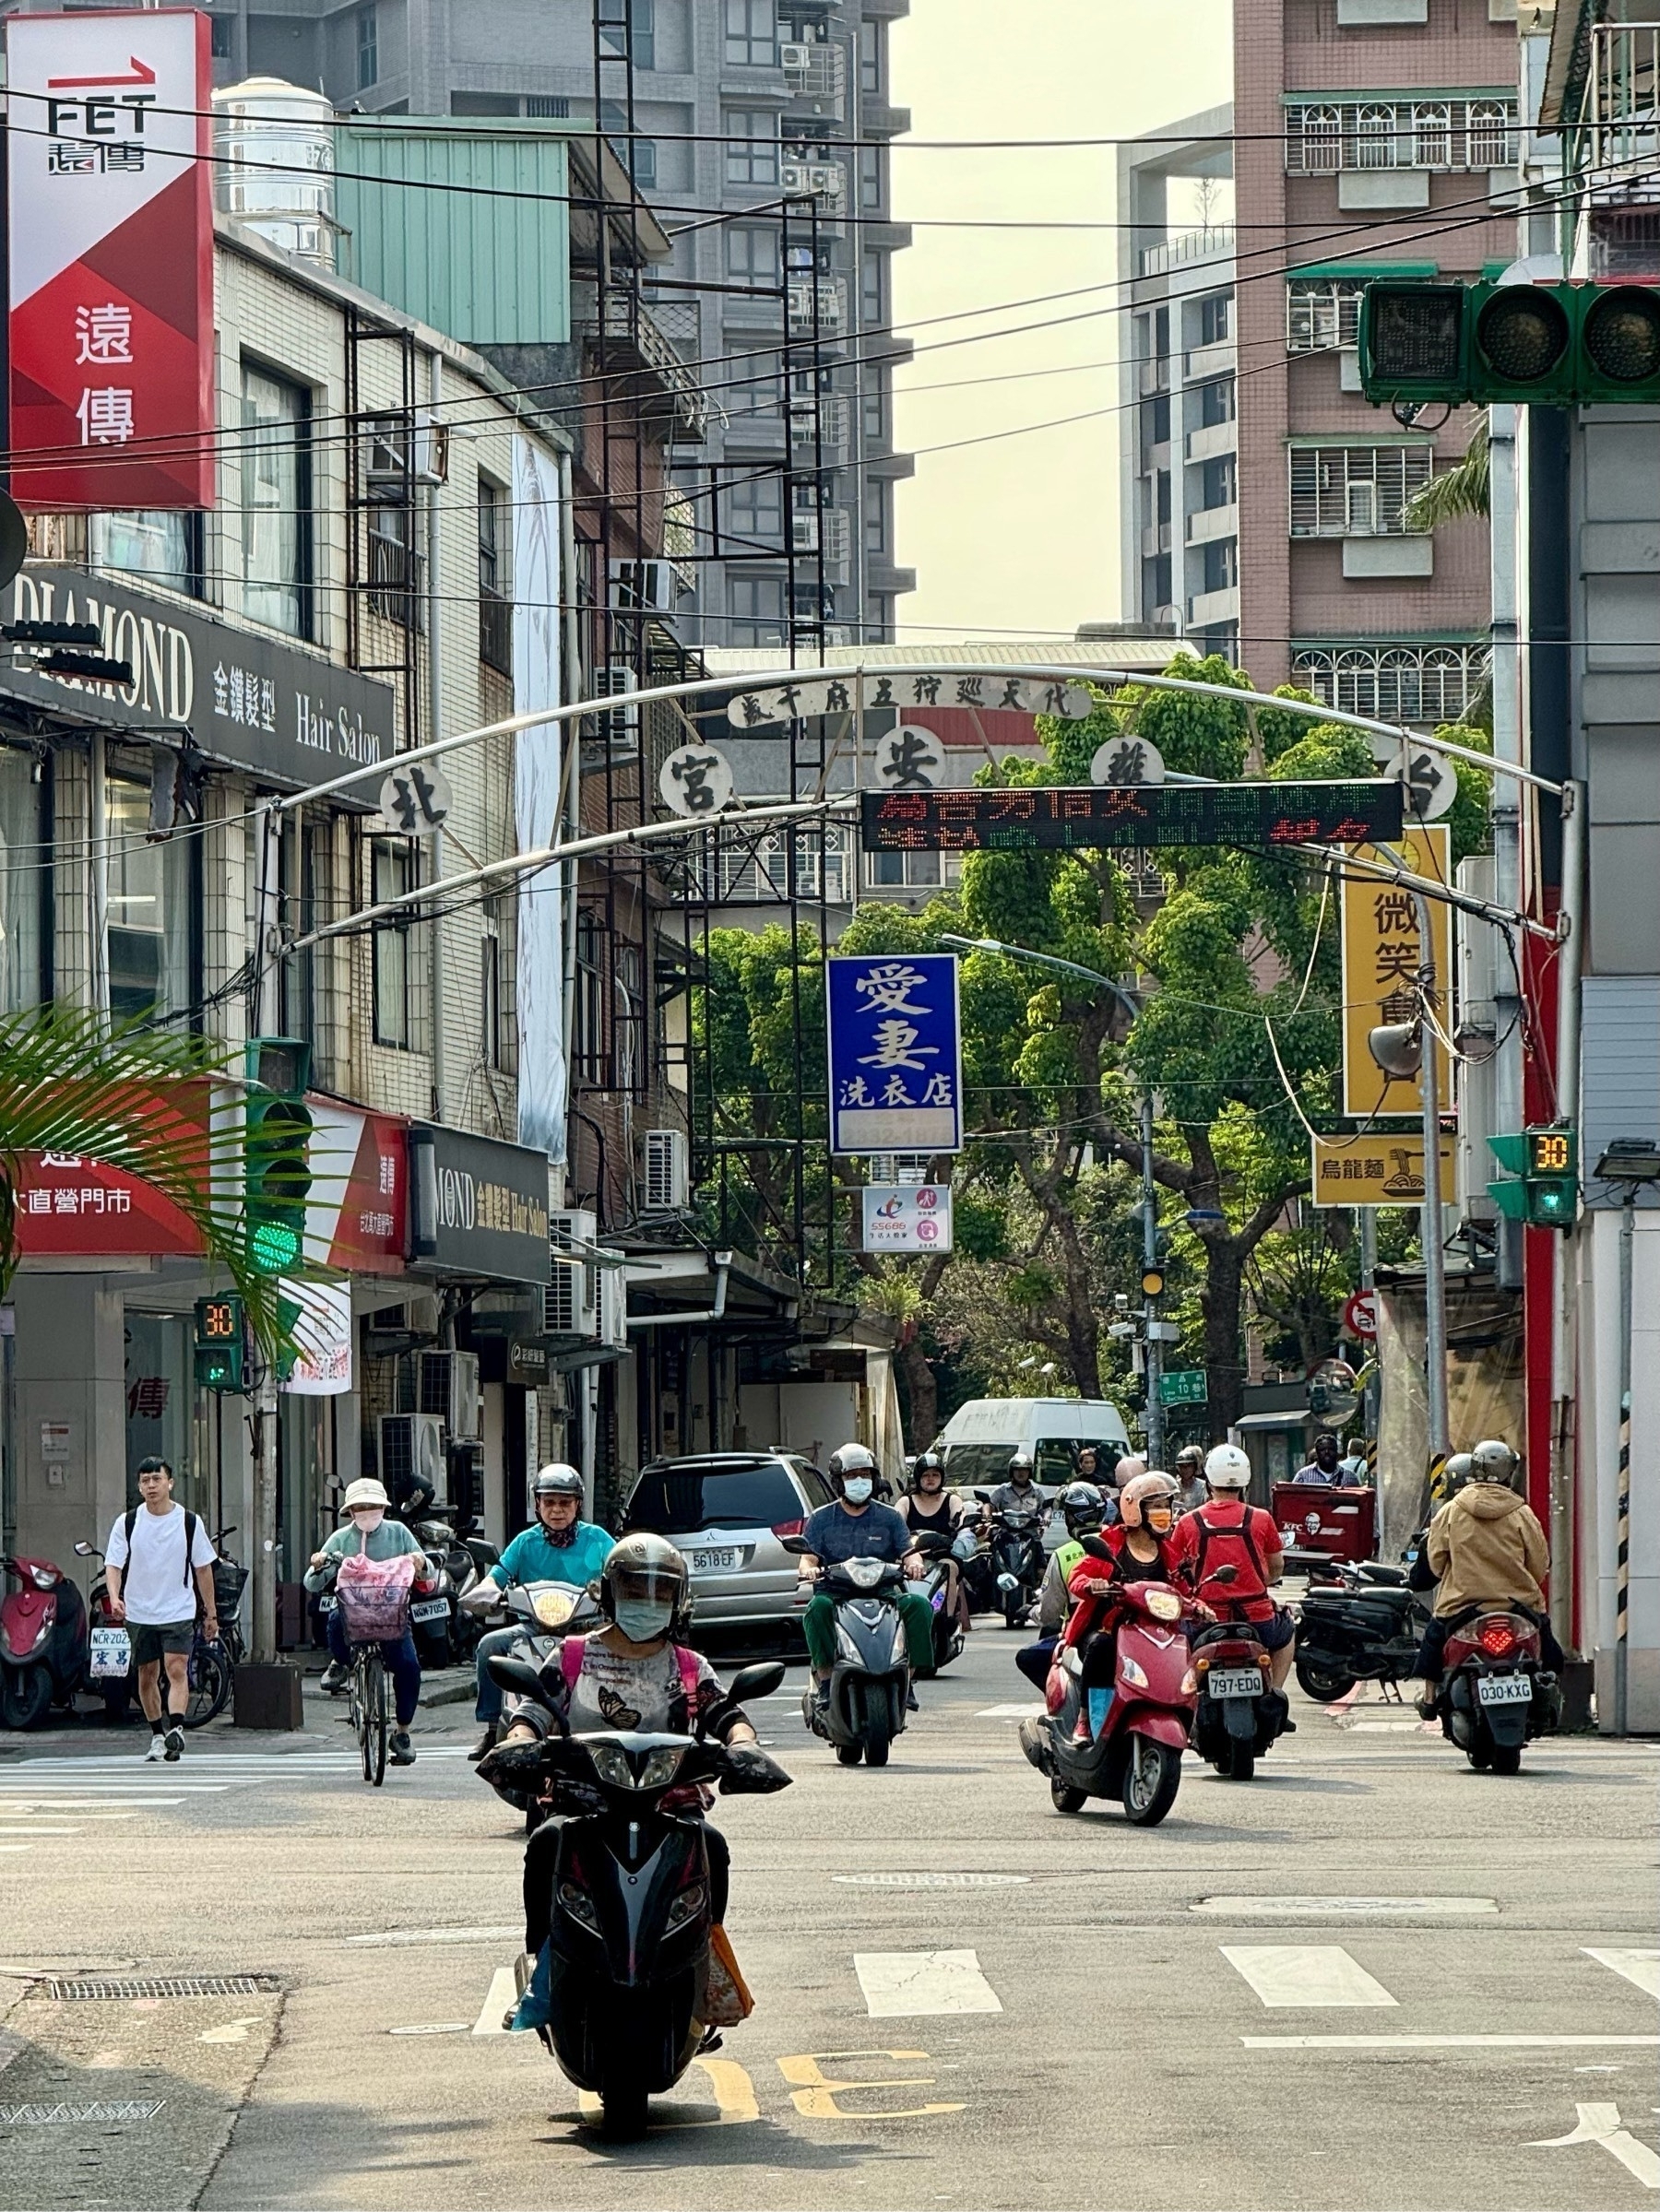 A small road junction, with several motorcycles coming towards the camera, and a blue sign hanging in the distance reading 愛妻洗衣店